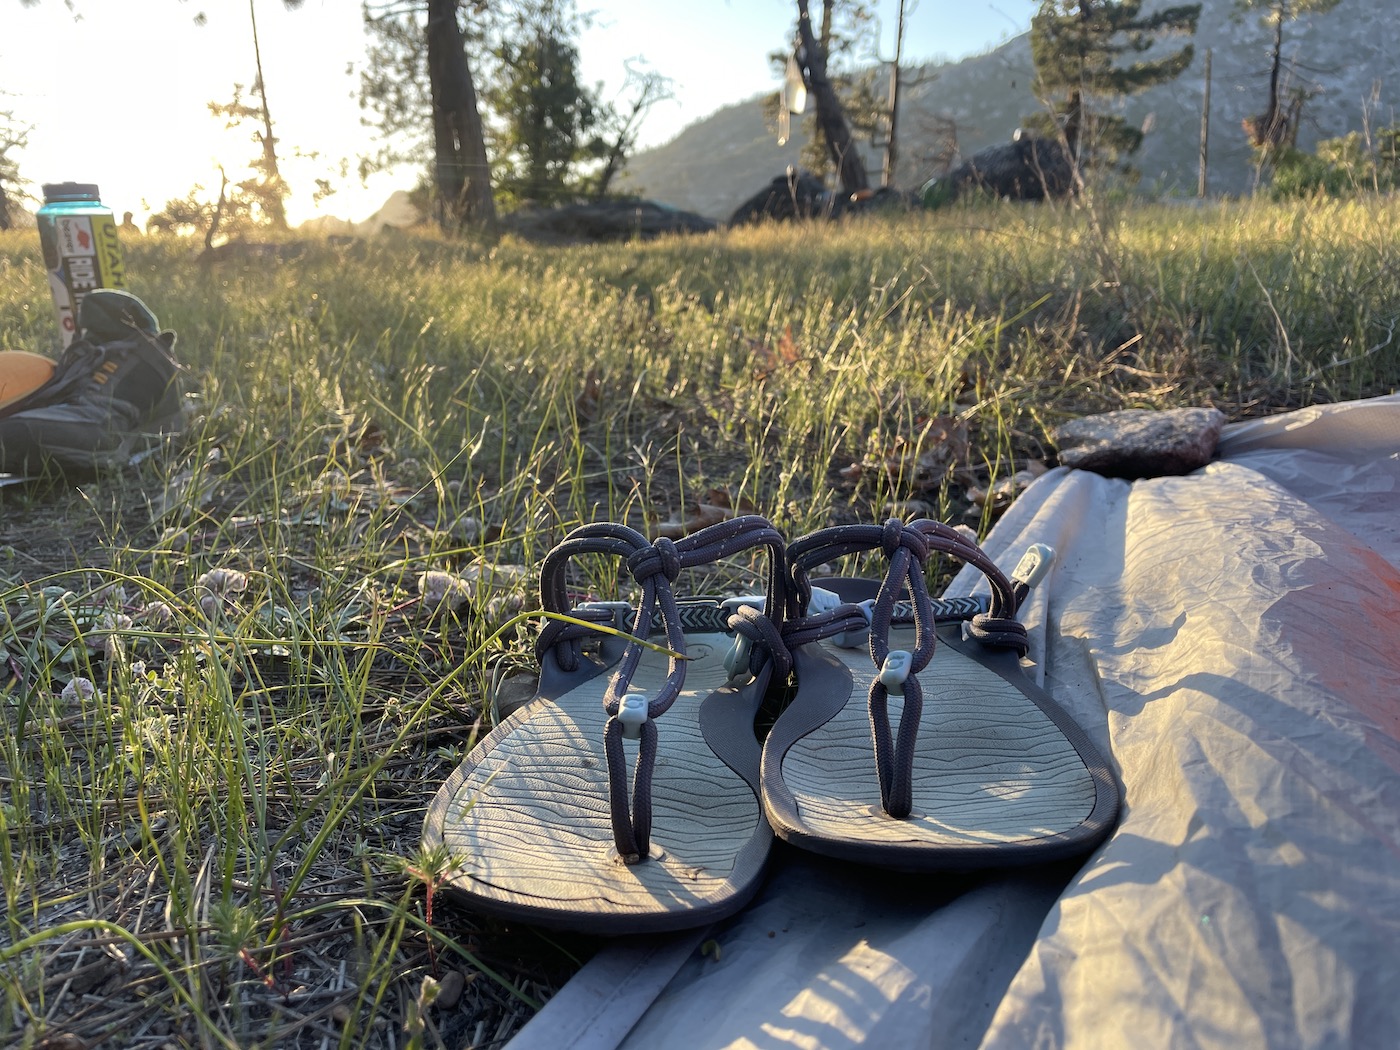 Best sandals for camping